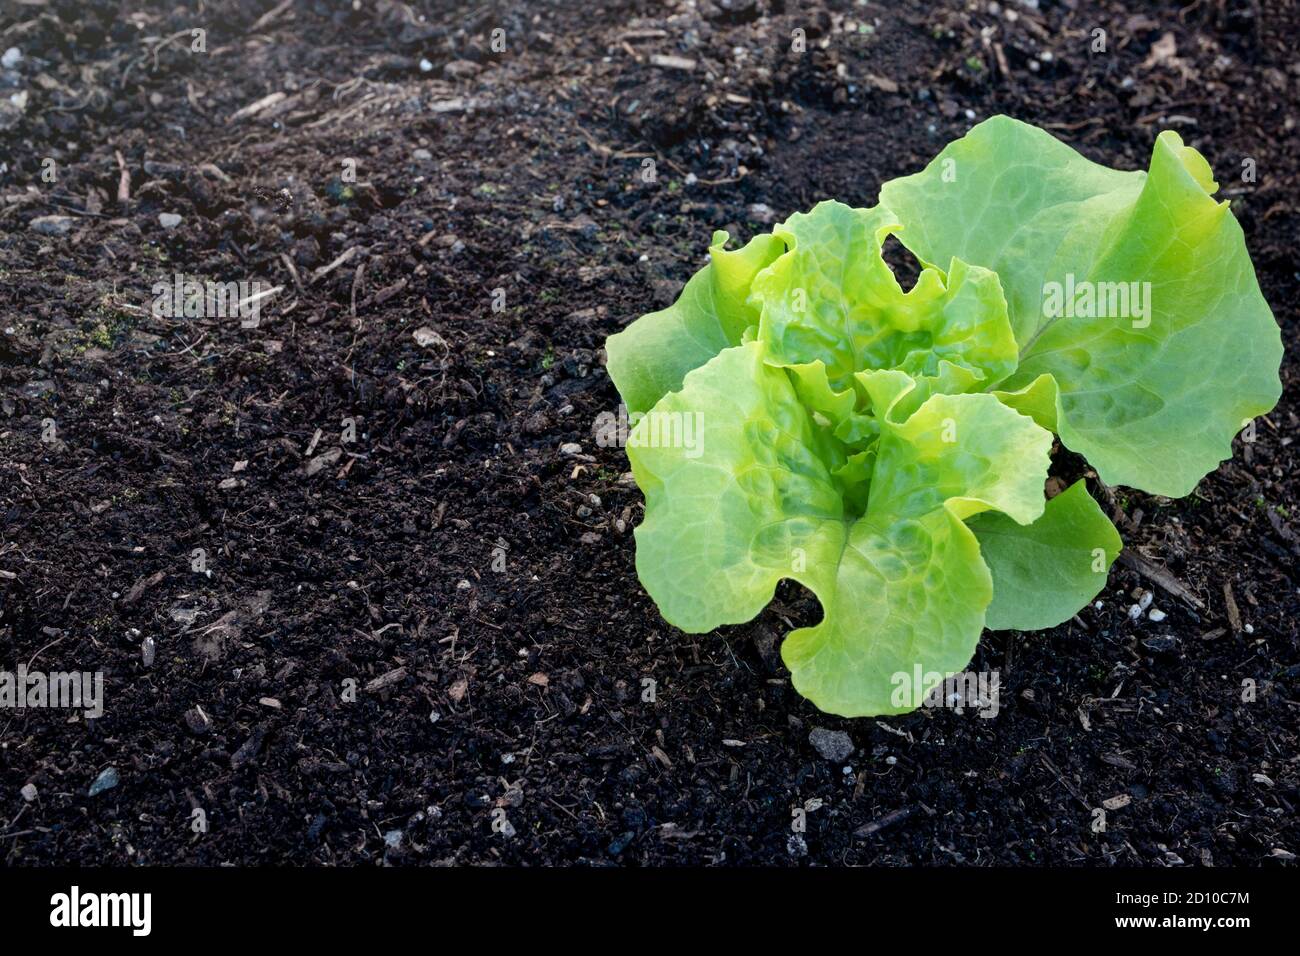 Single small lettuce plant seedling surrounded by soil. 2-3 weeks old after emerging. Cabbage lettuce (Lactuca sativa). Close up. Stock Photo